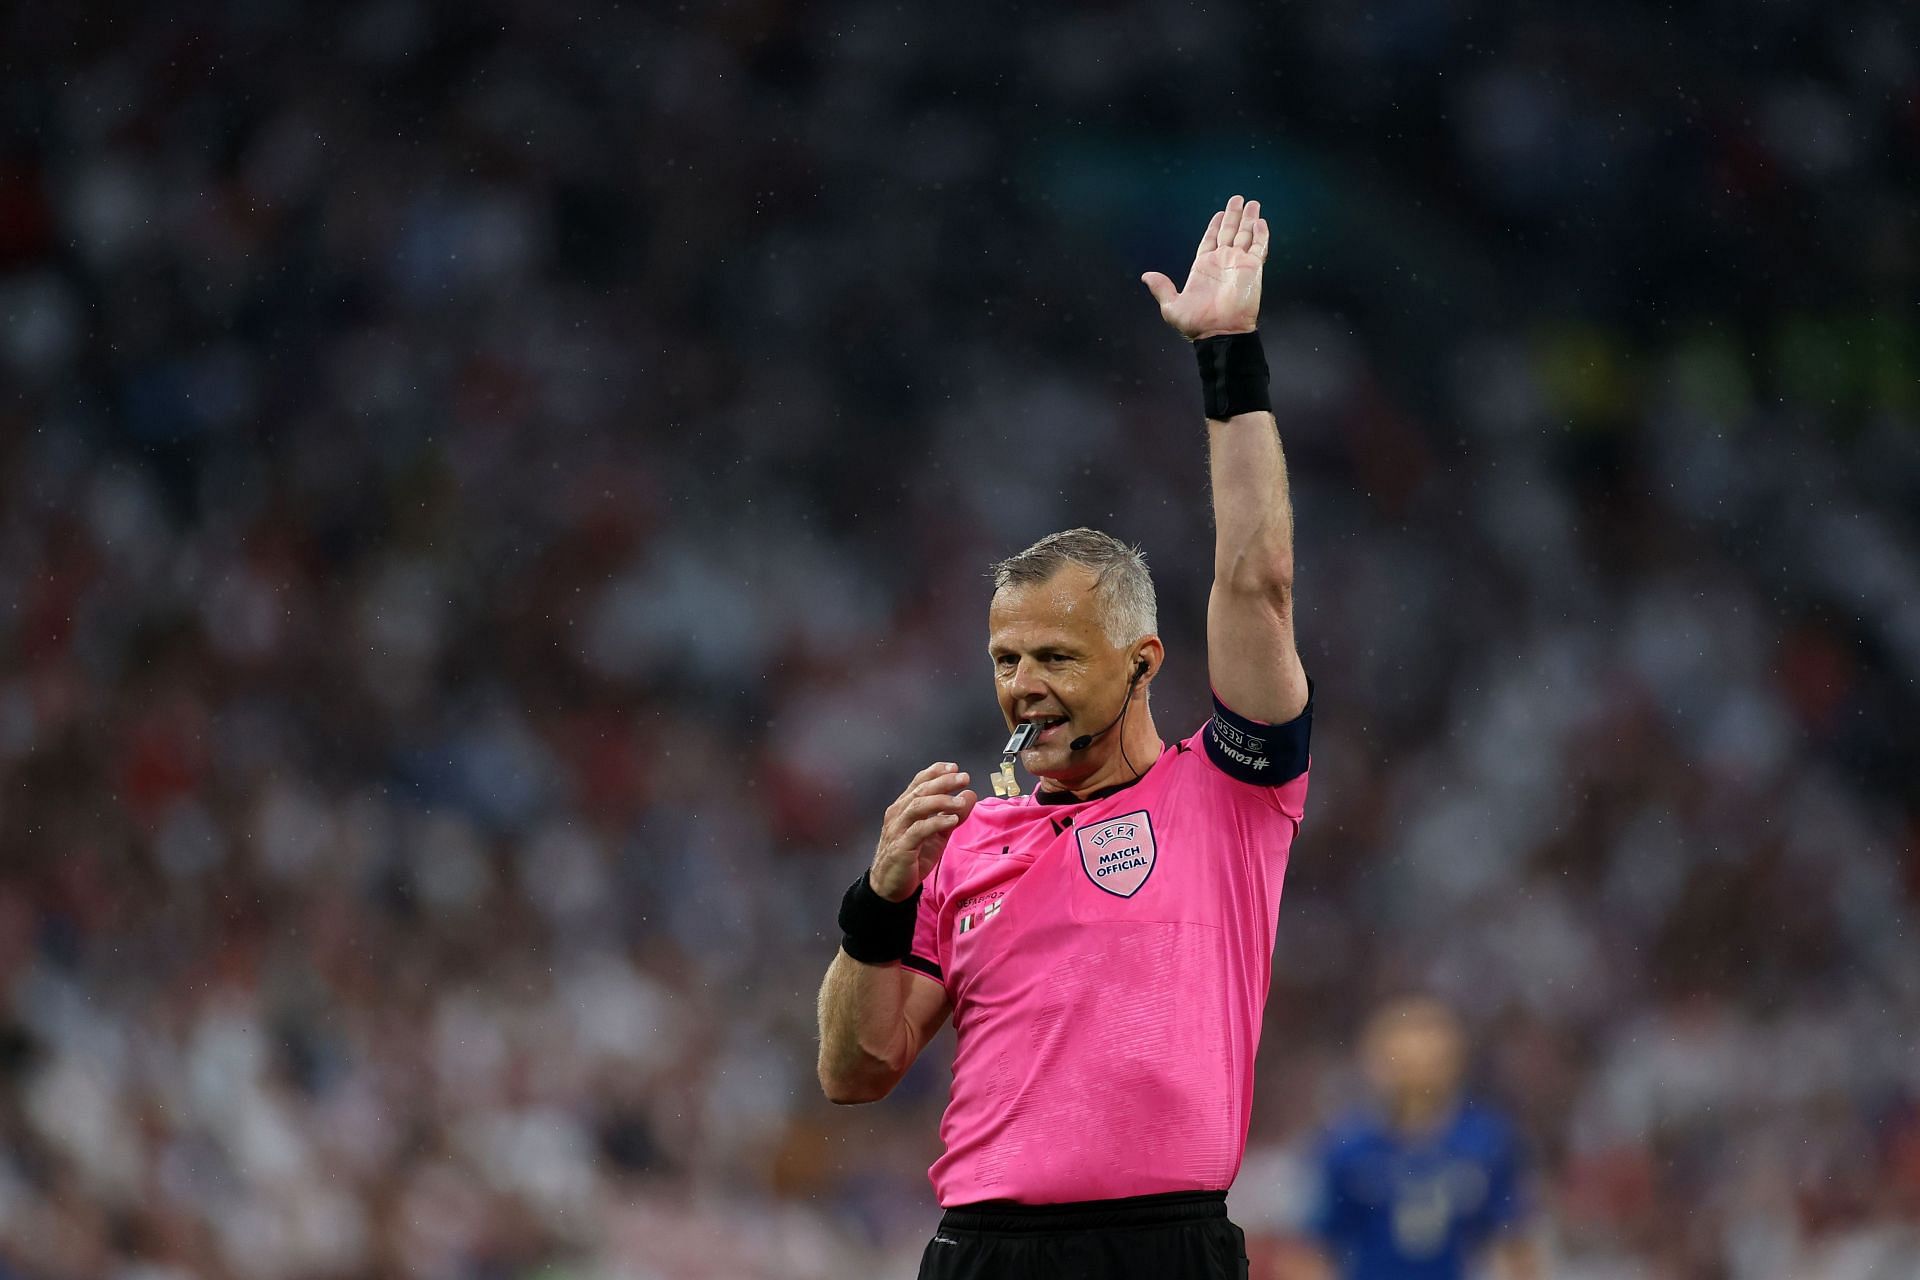 Referee, Bjoern Kuipers gestures during the UEFA Euro 2020 Championship Final between Italy and England at Wembley Stadium.